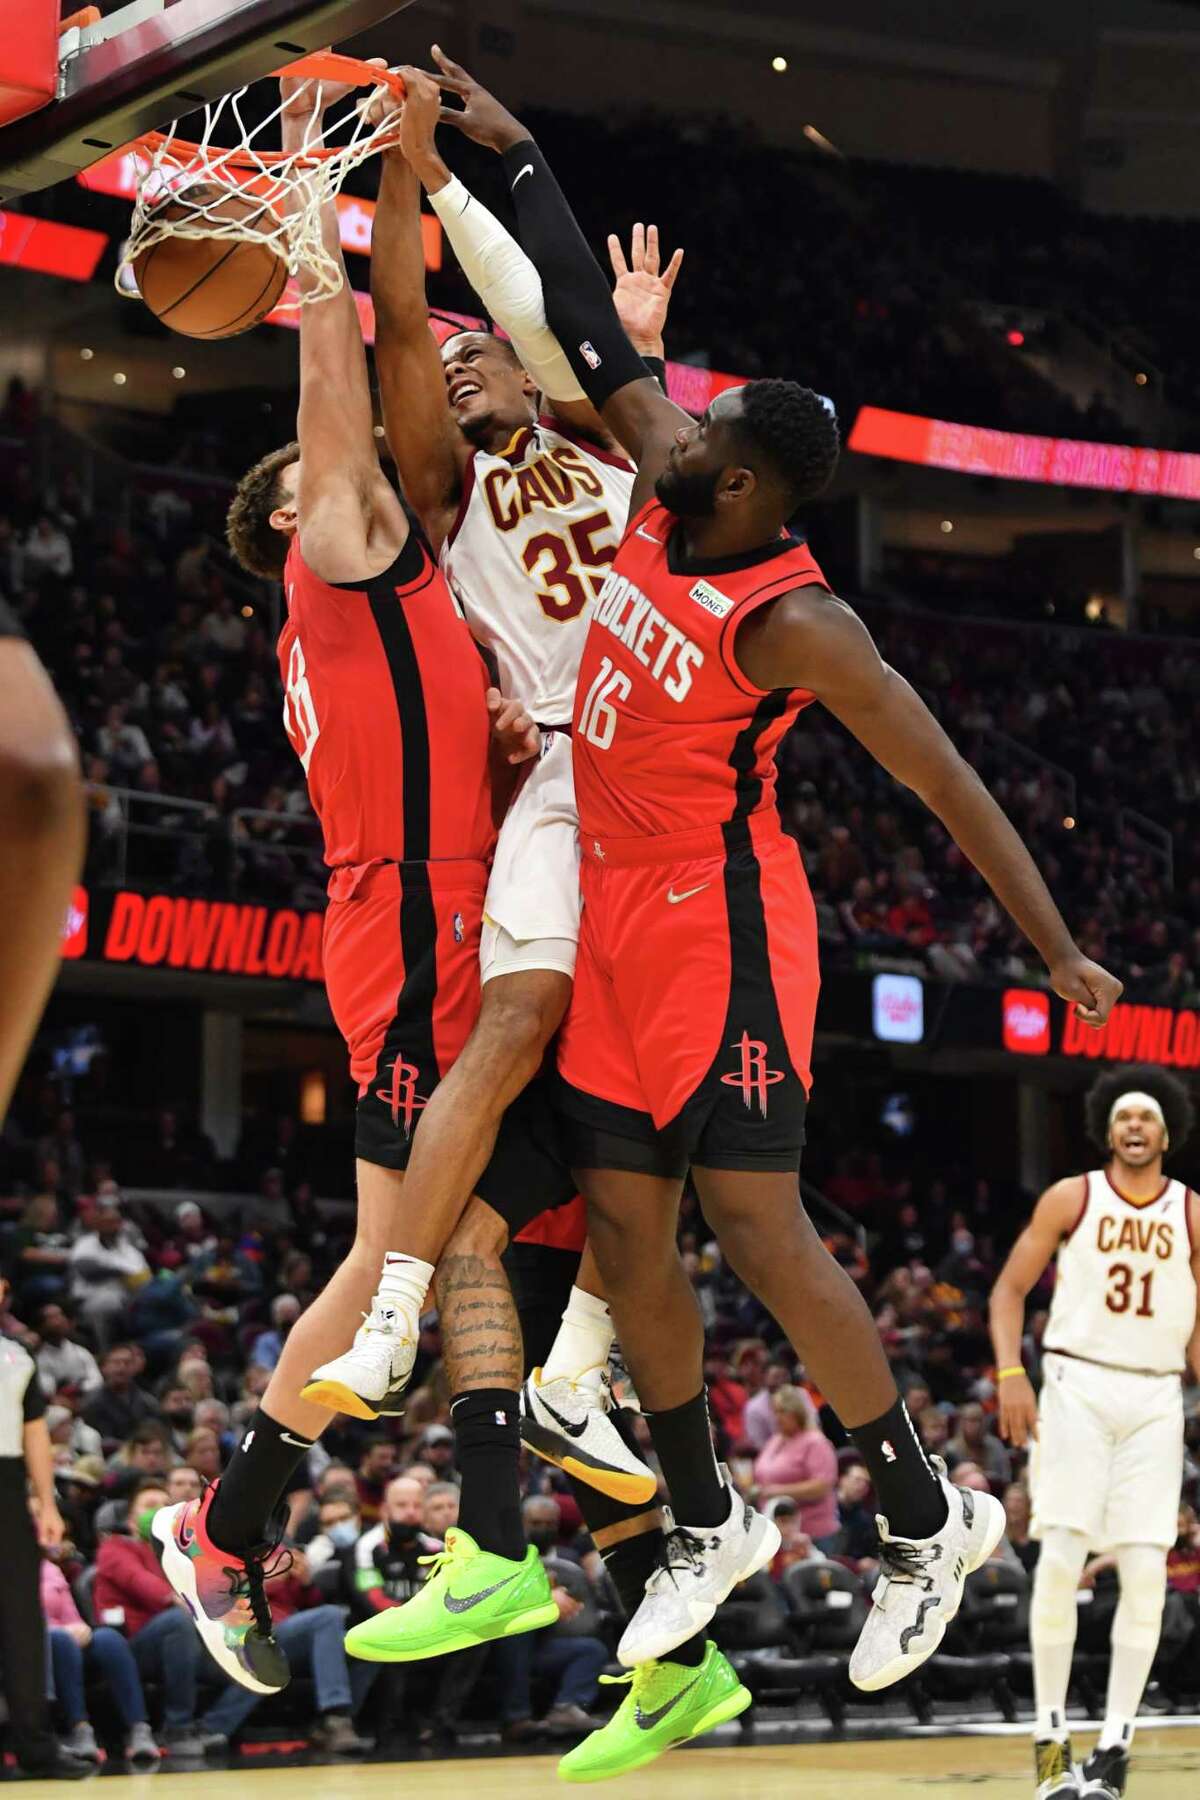 CLEVELAND, OHIO - DECEMBER 15: Isaac Okoro #35 of the Cleveland Cavaliers dunks over Alperen Sengun #28 and Usman Garuba #16 of the Houston Rockets during the third quarter at Rocket Mortgage Fieldhouse on December 15, 2021 in Cleveland, Ohio. The Cavaliers defeated the Rockets 124-89.